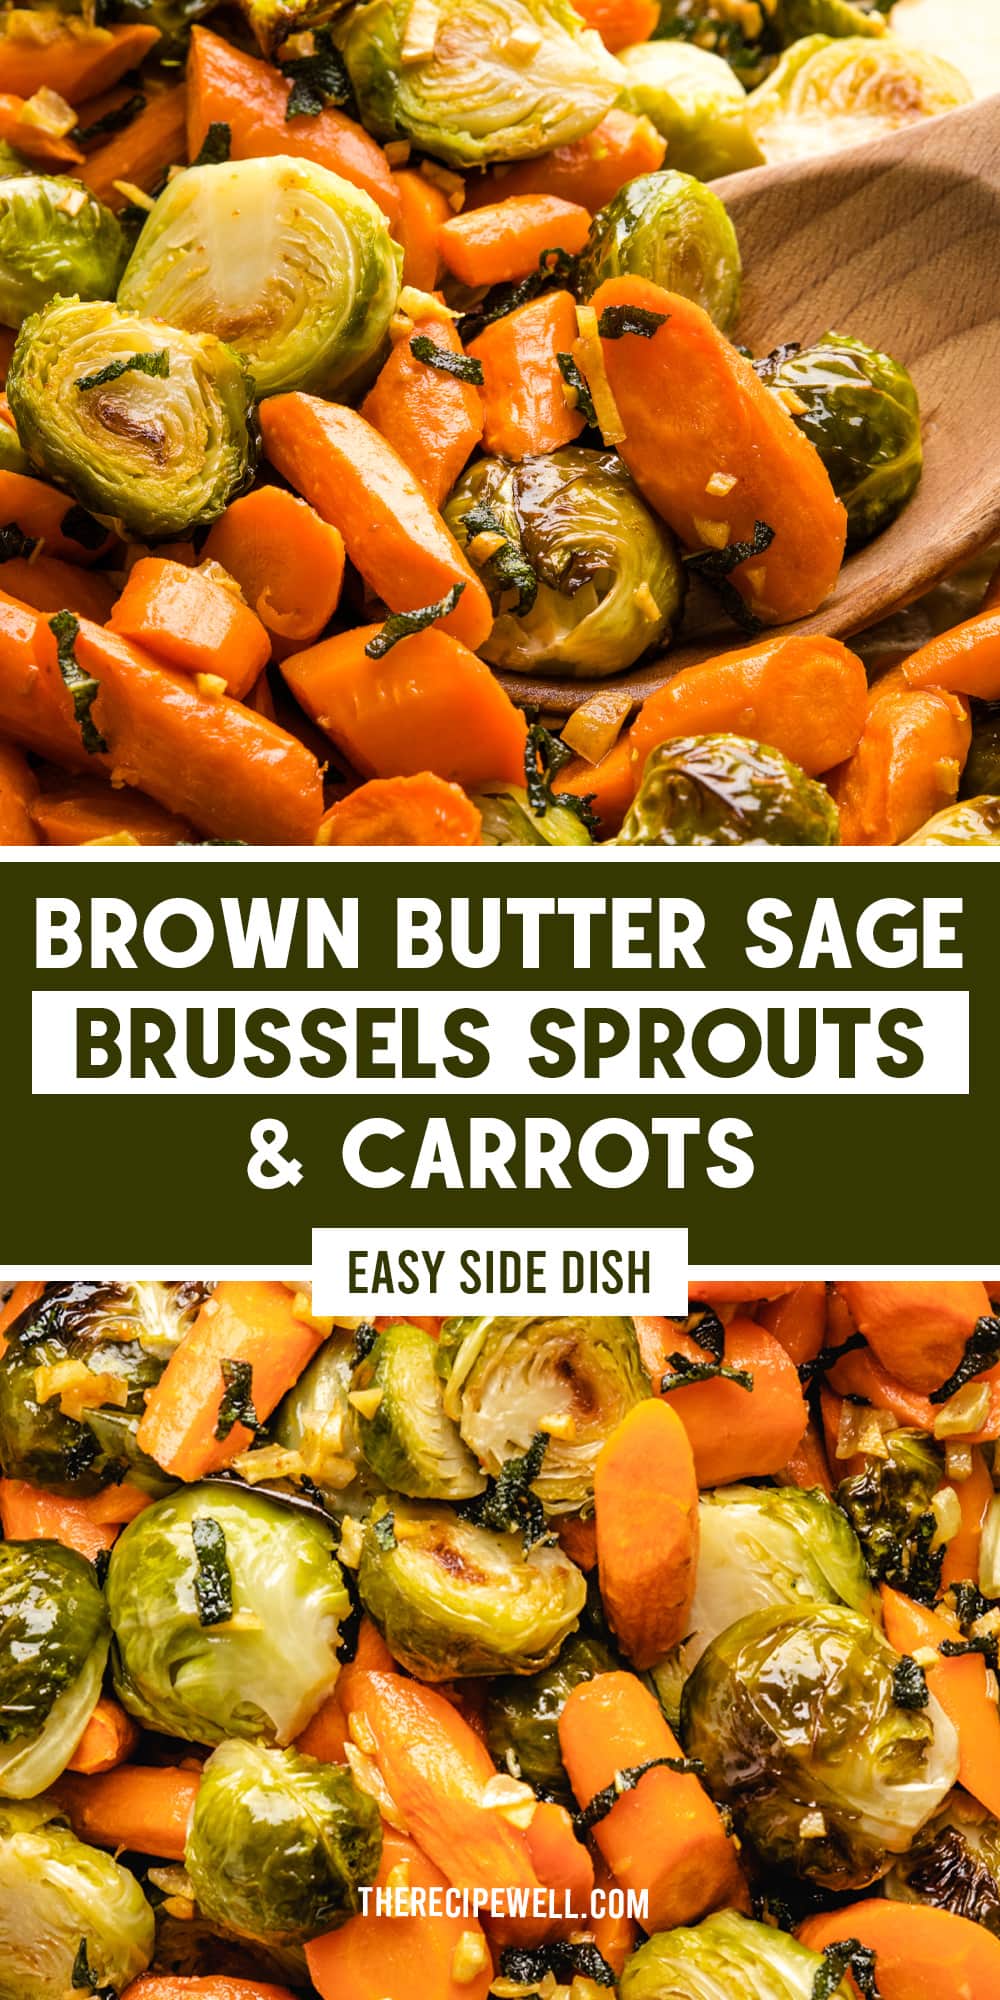 Roasted Brussels Sprouts and Carrots are so easy to make and perfect for a Thanksgiving or Christmas menu. For extra fall flavour, try the garlic brown butter sage topping! via @therecipewell